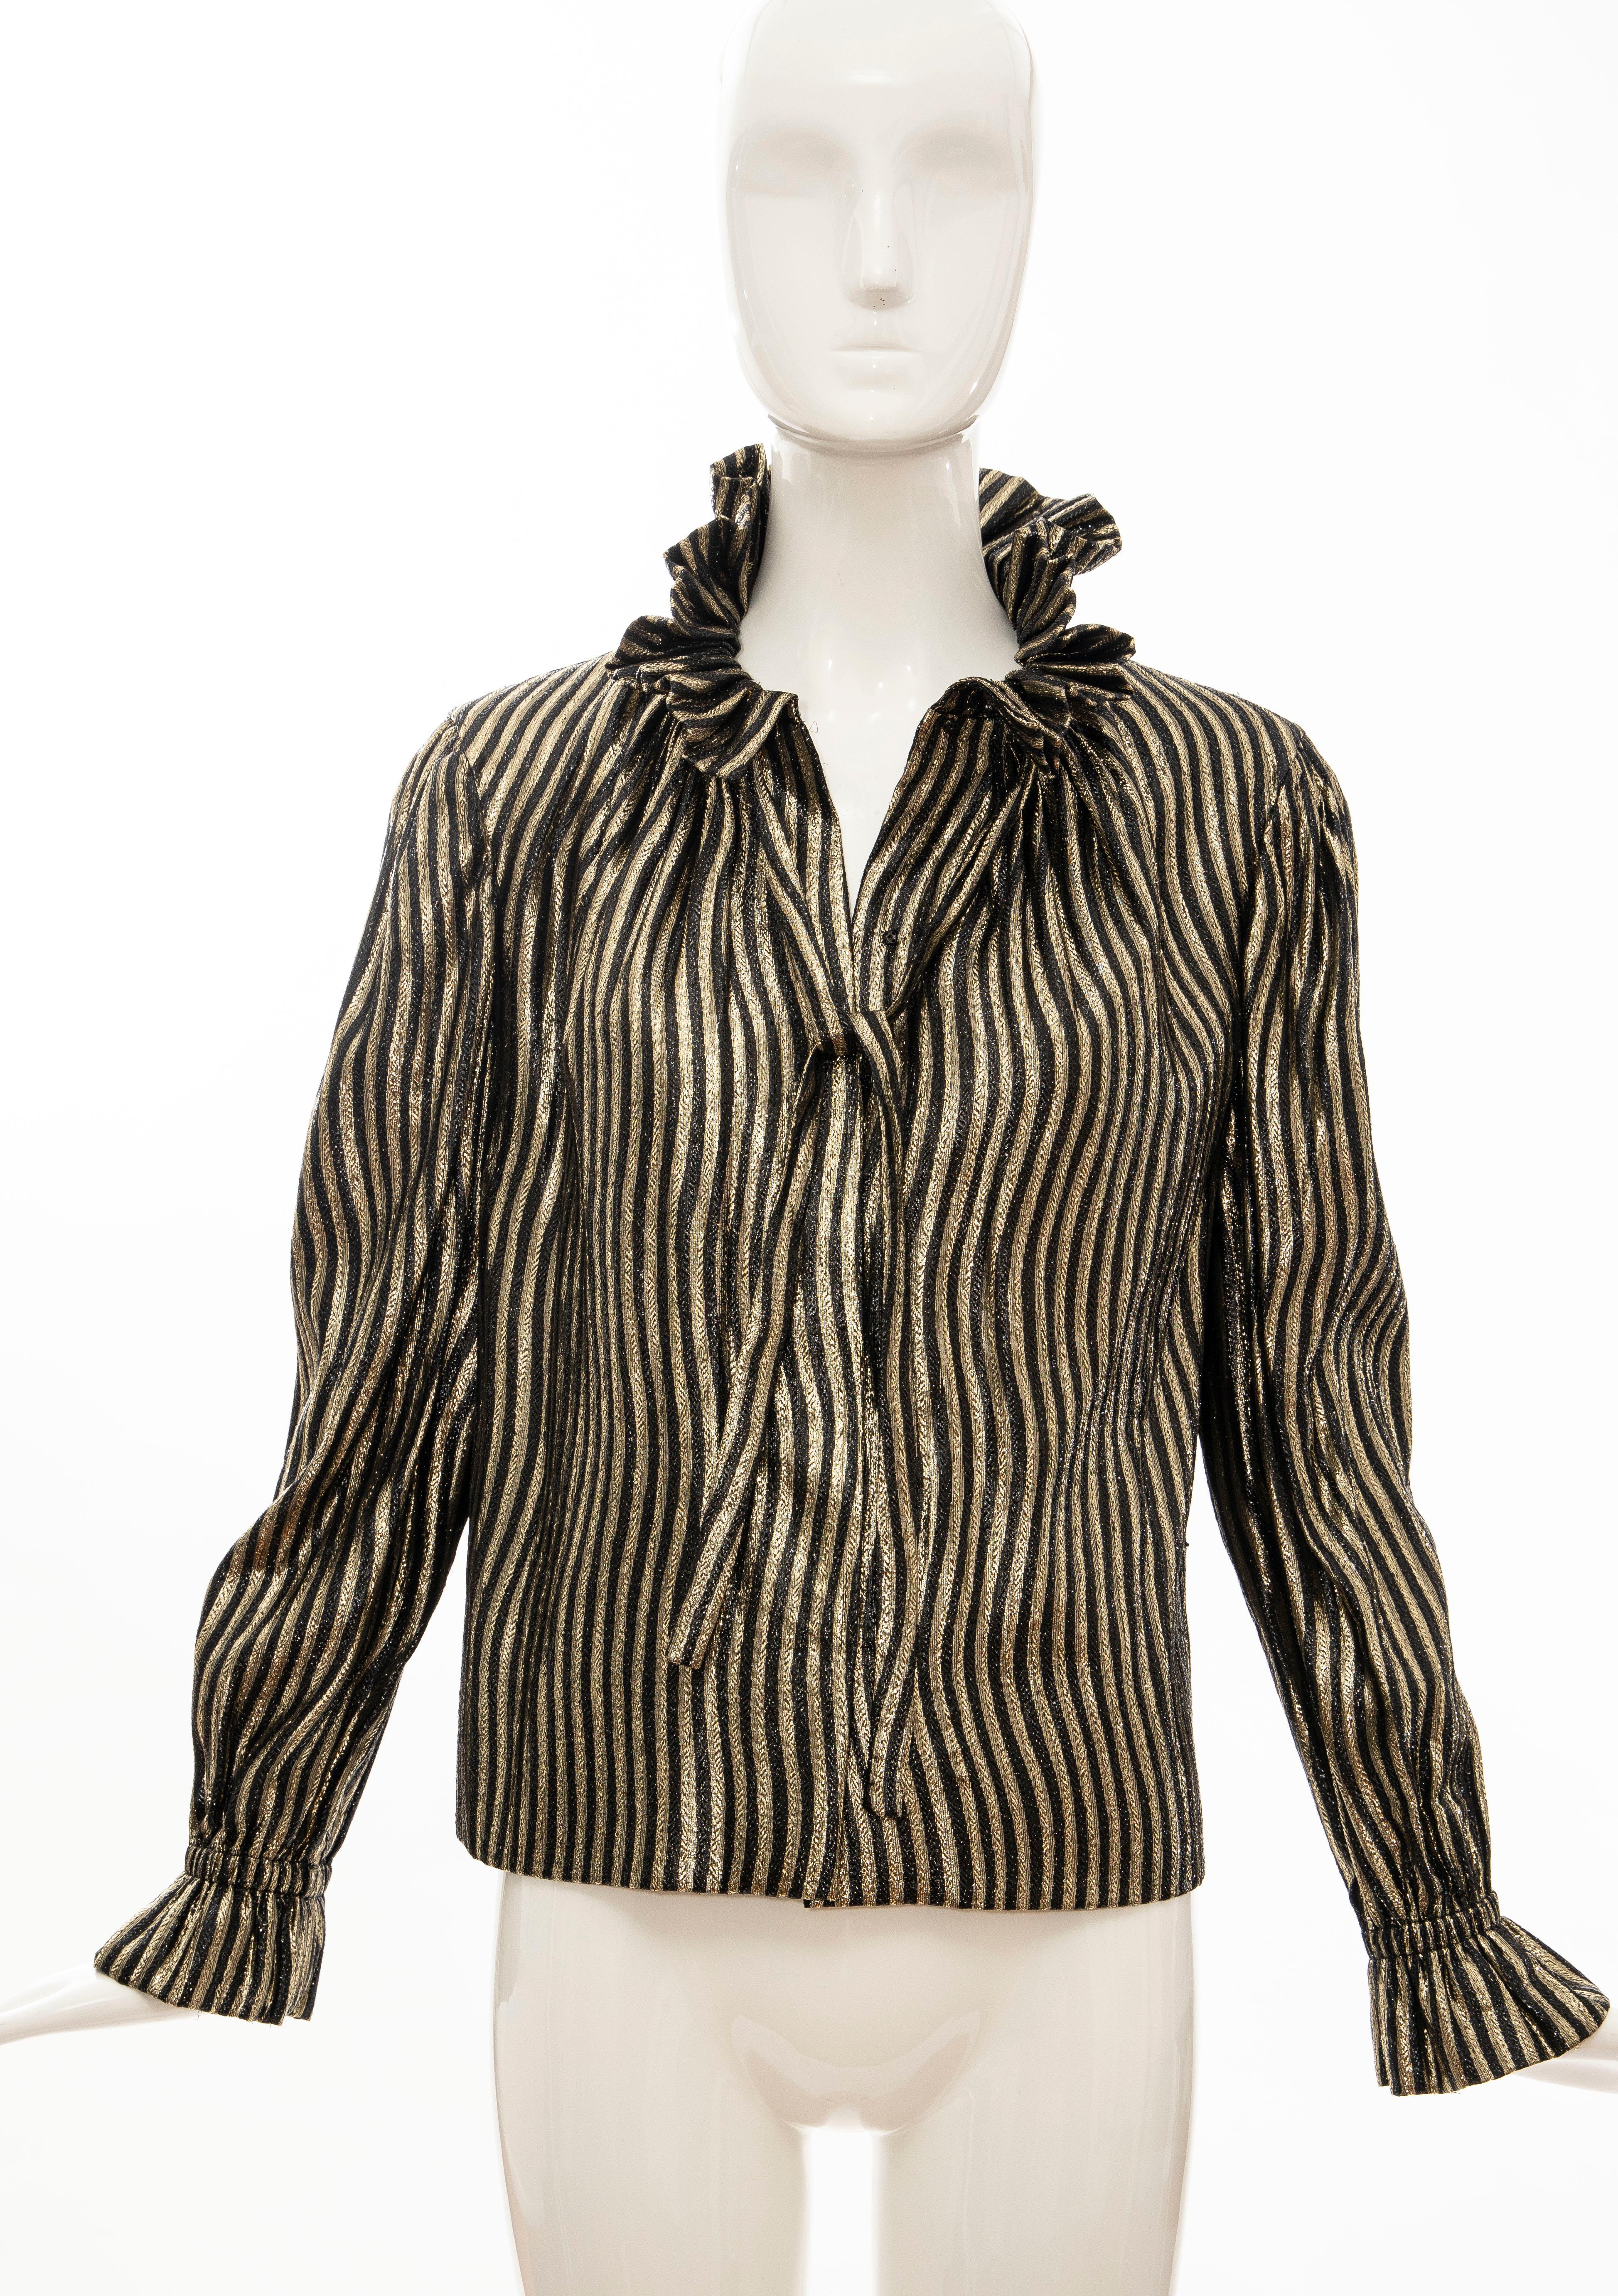 Pauline Trigere Black Gold Striped Metallic Snap Front Blouse, Circa: 1970's For Sale 9